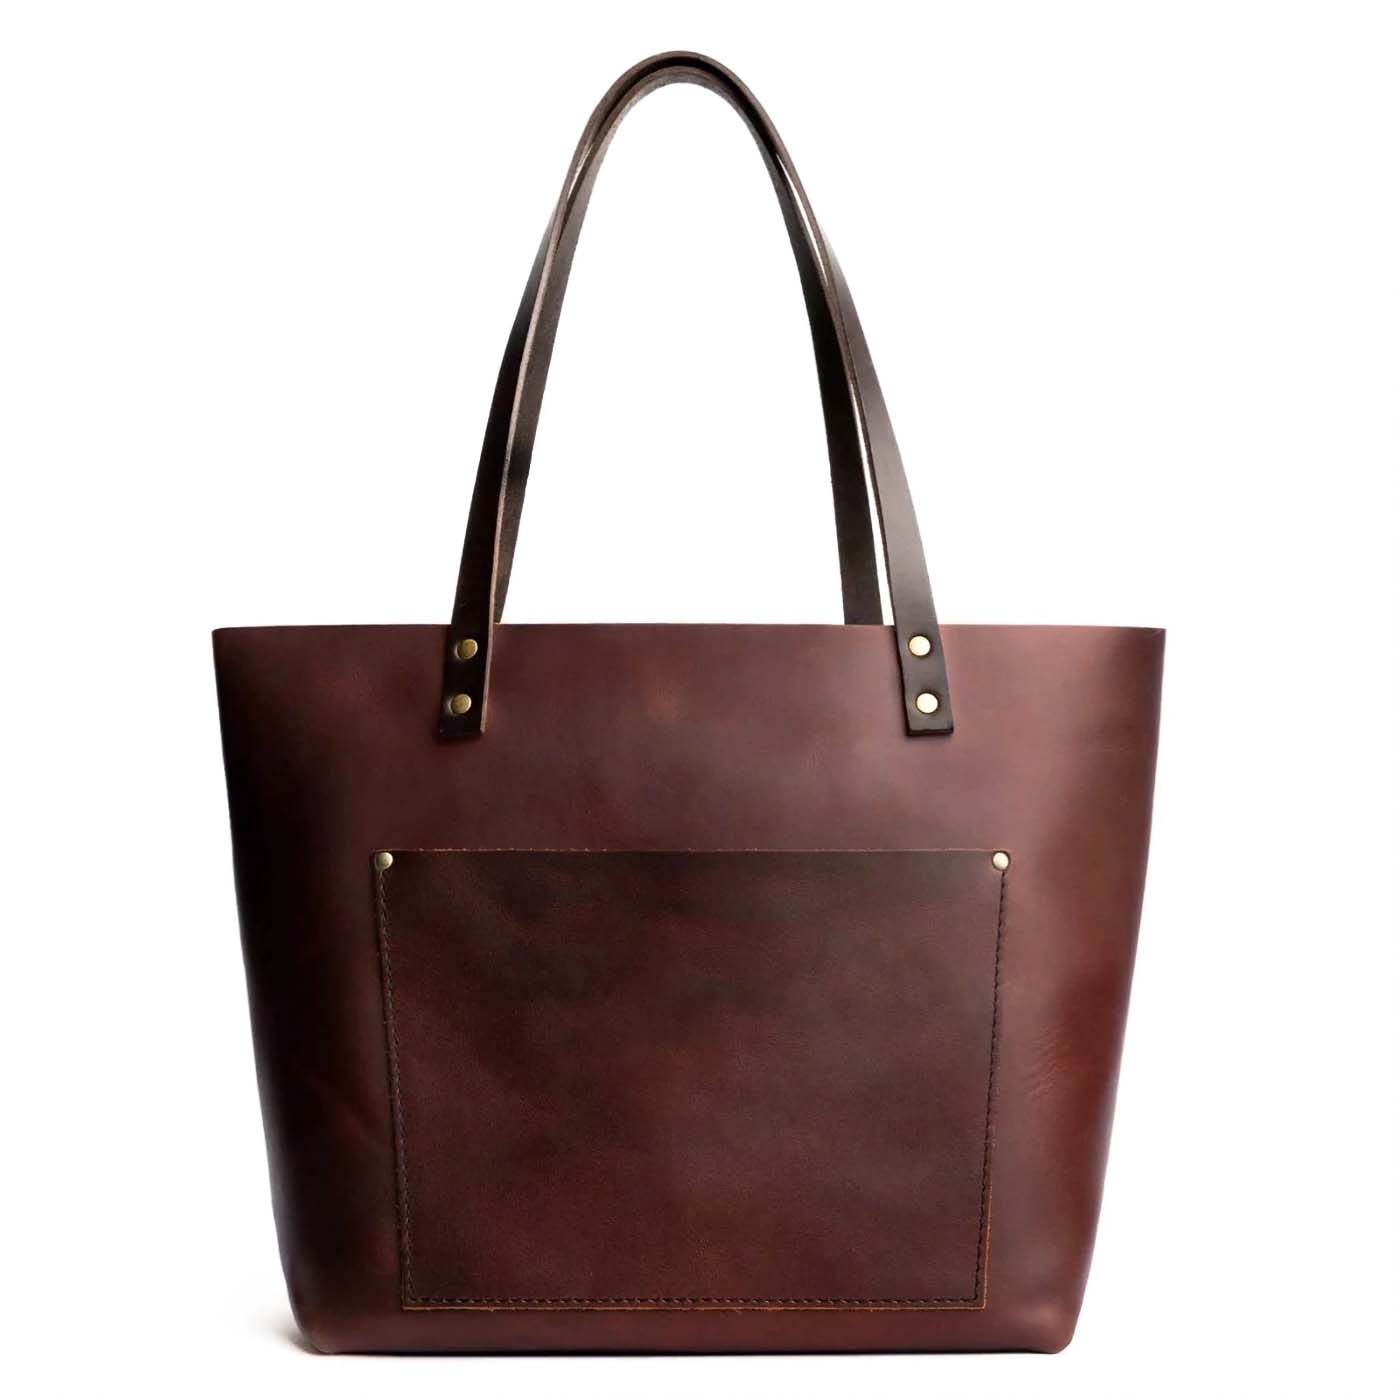 Jet Set Travel Extra-Small Saffiano Leather Top-Zip Tote Bag | Michael Kors